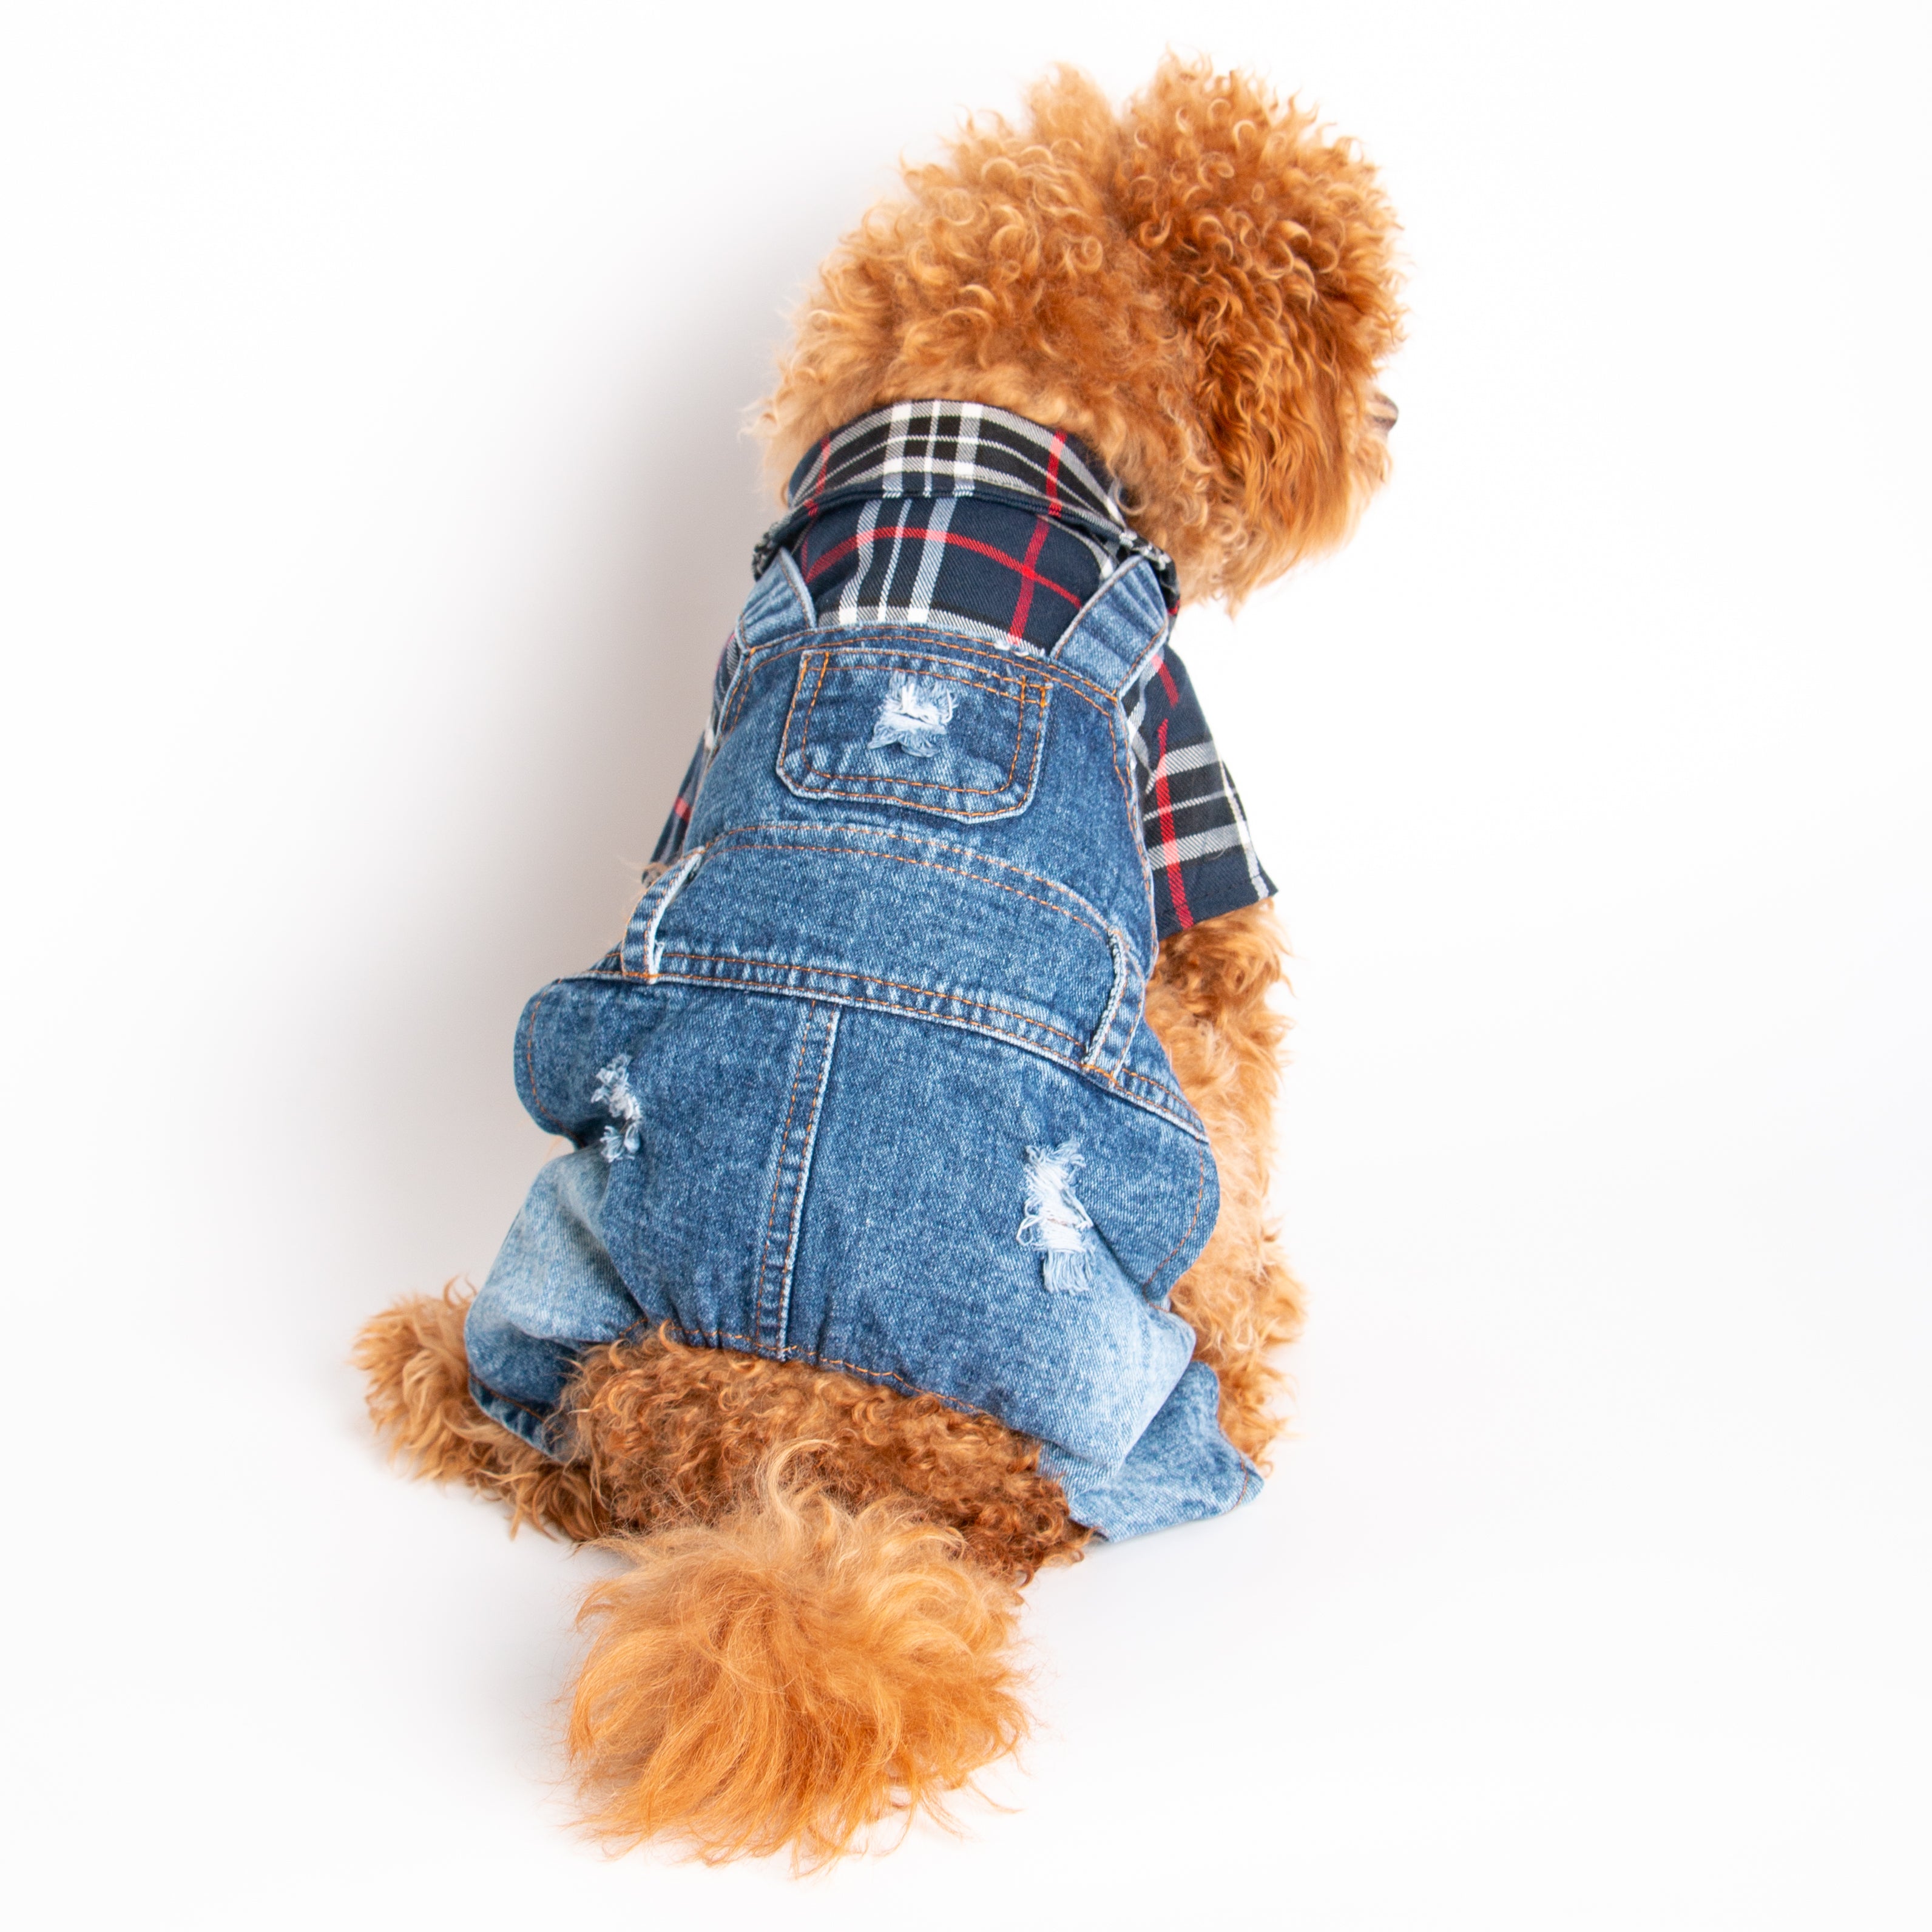 Checkered Dog Jumpsuit